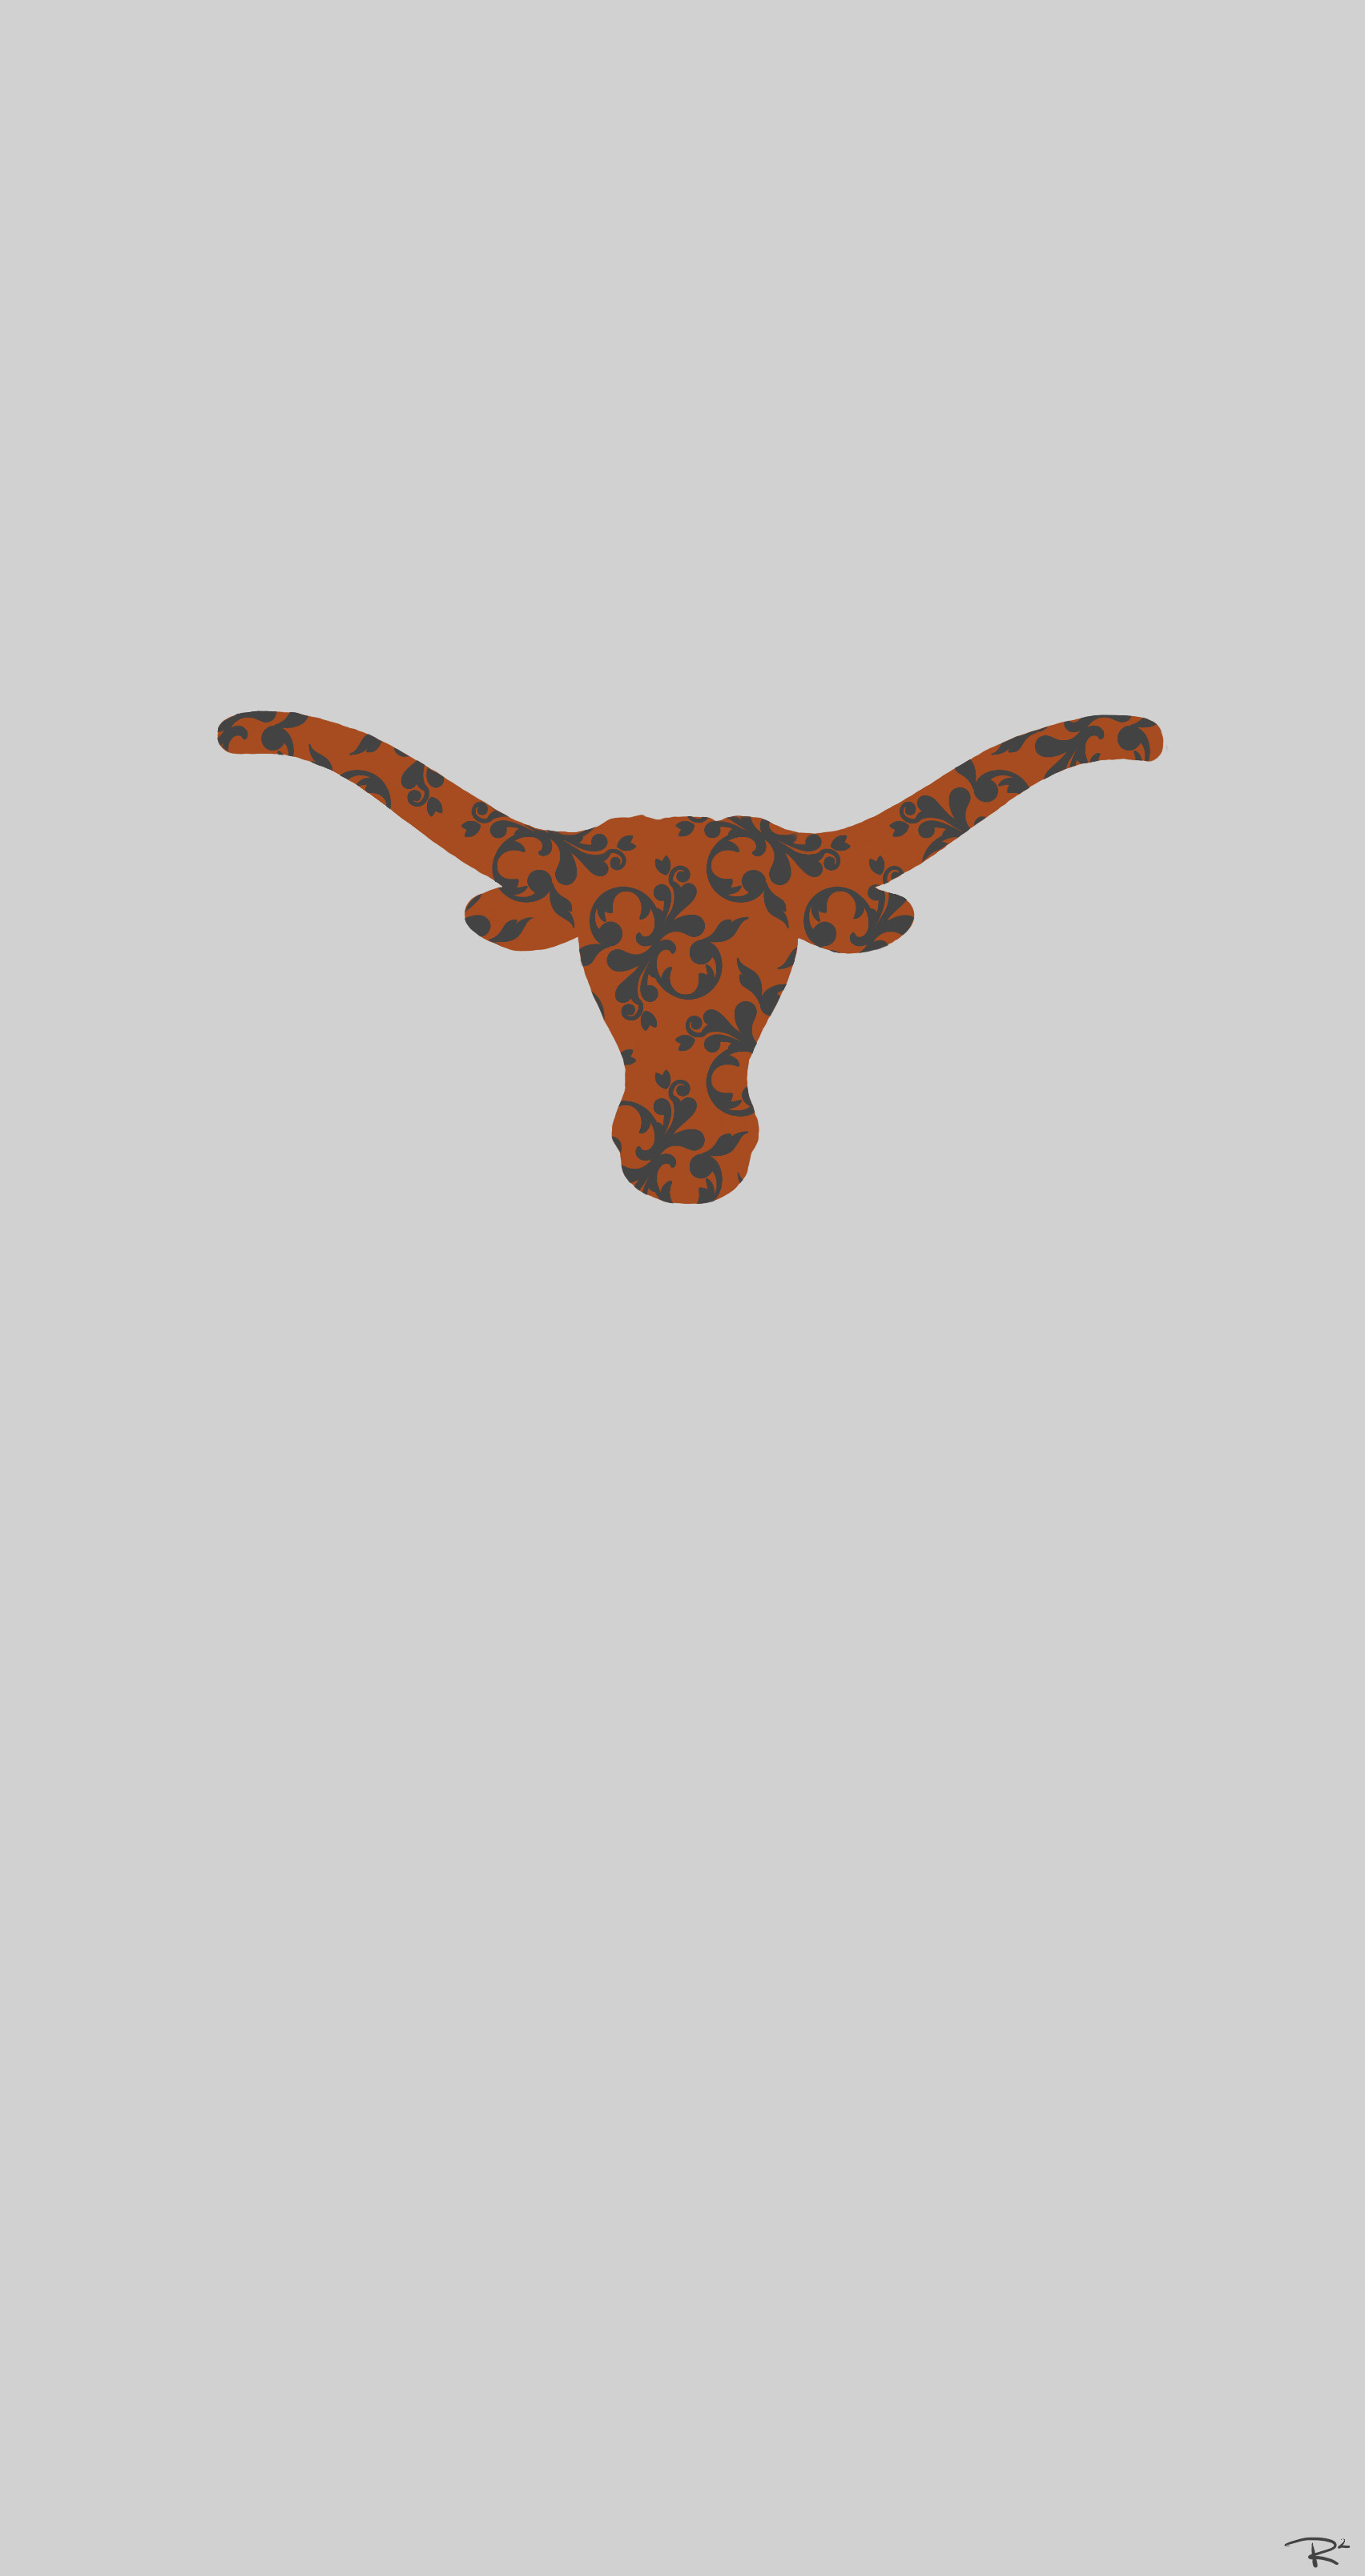 1704x3216 Texas Longhorn Wallpapers Top Free Texas Longhorn Backgrounds